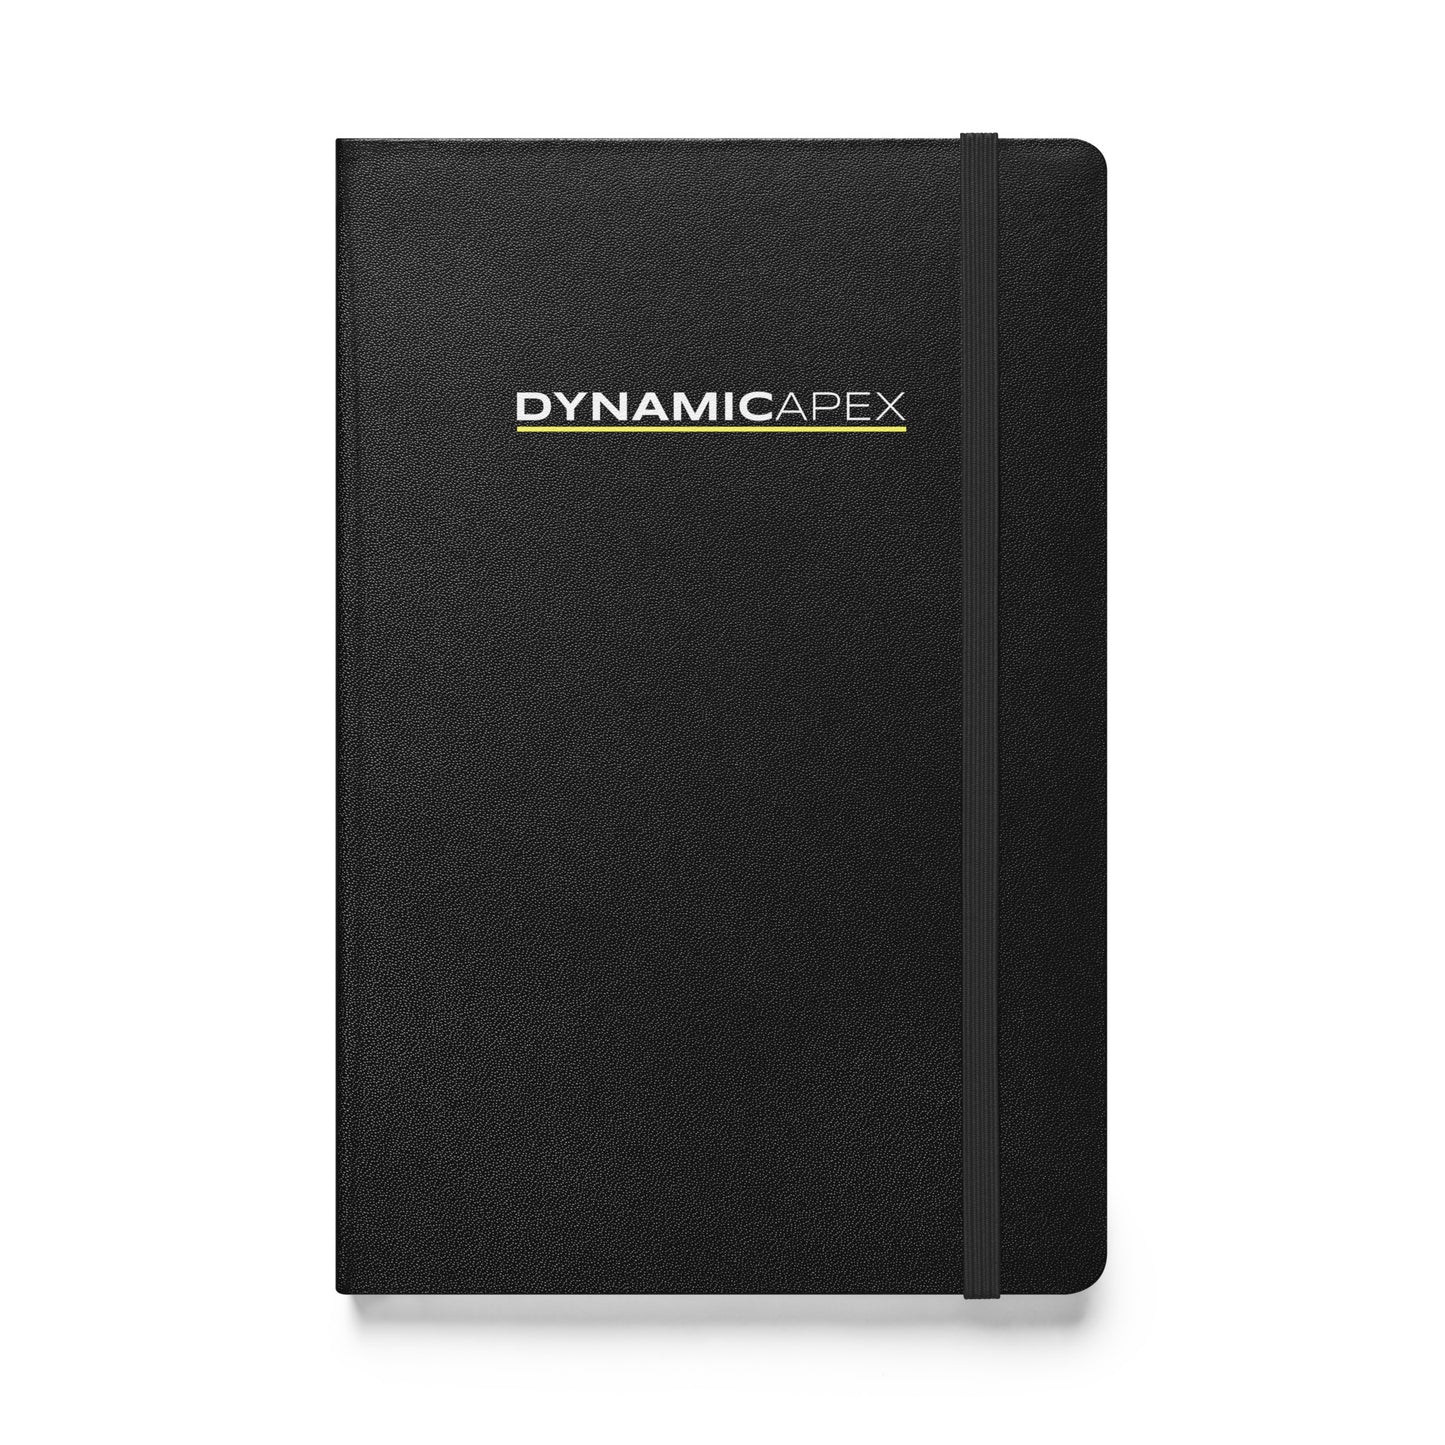 DYNAMICAPEX Hardcover Notebook